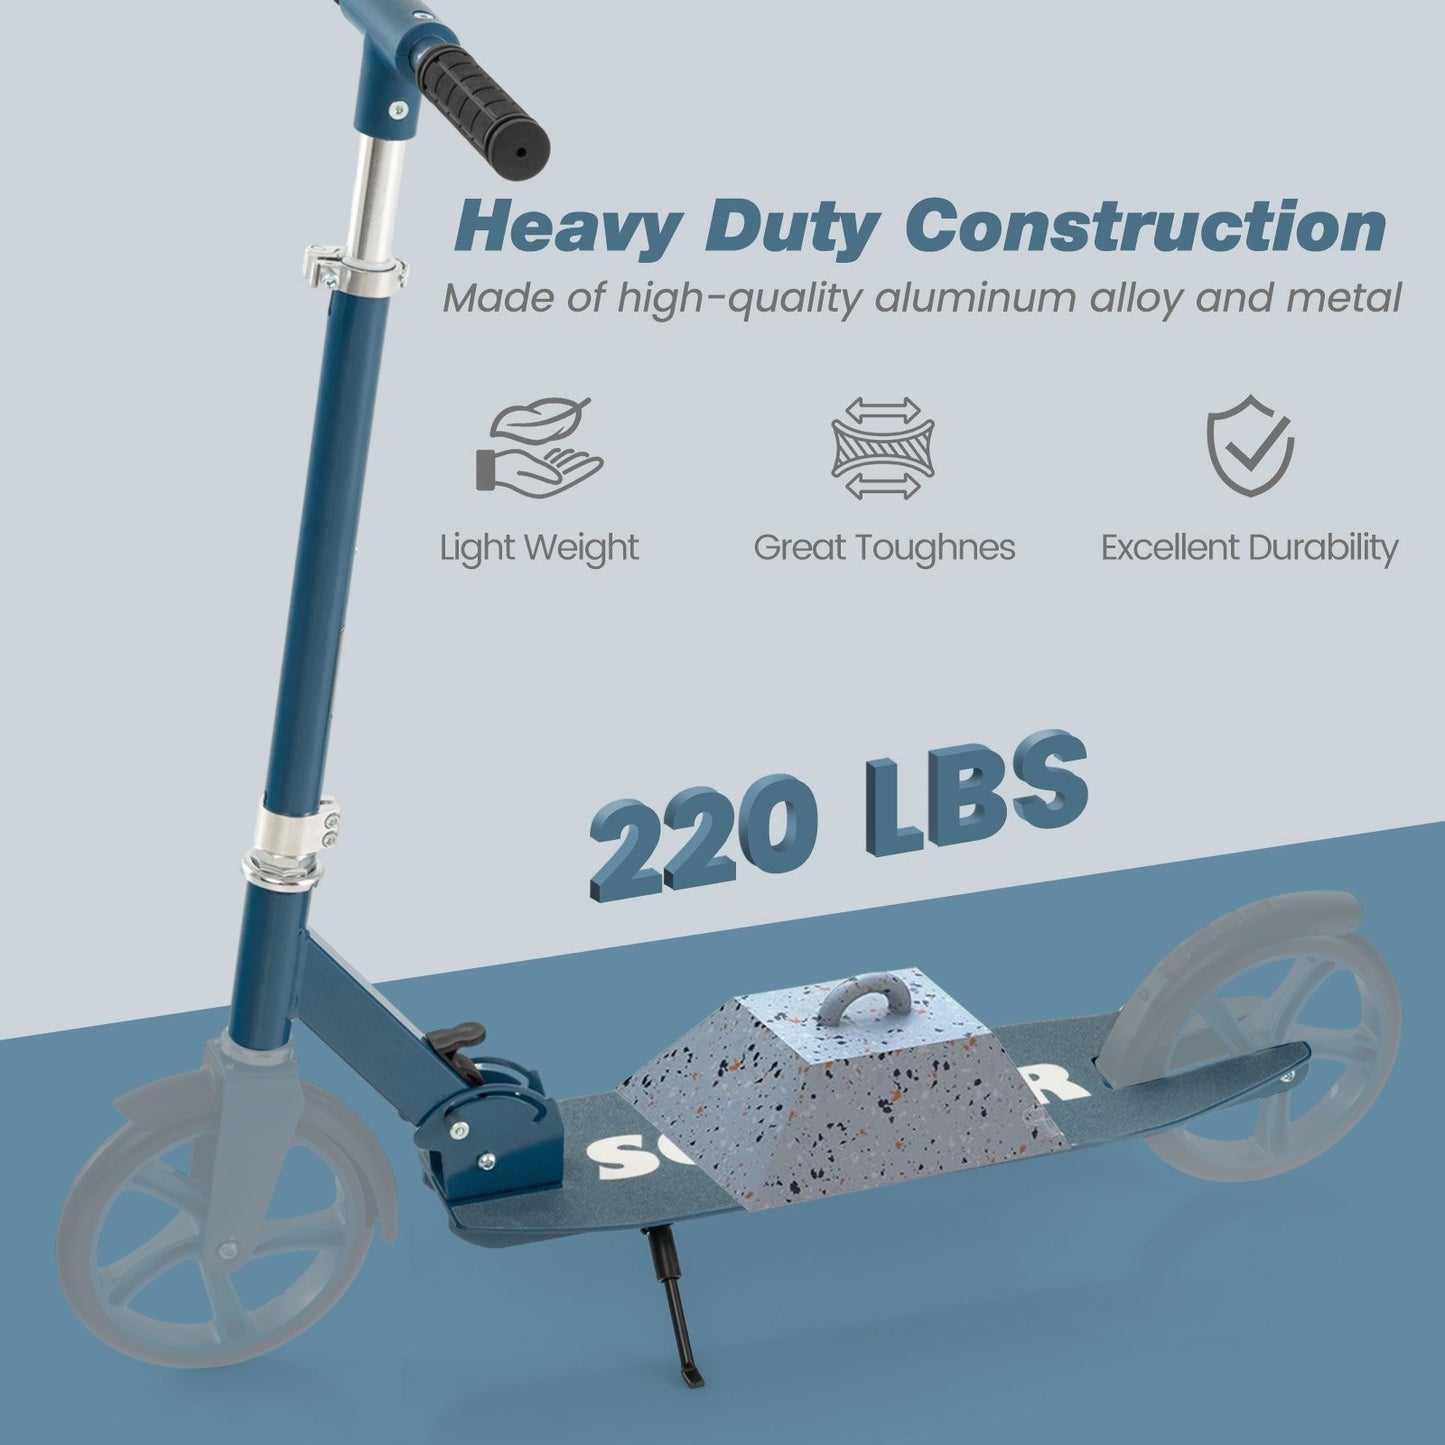 Folding Aluminum Alloy Scooter with 3 Adjustable Heights, Blue